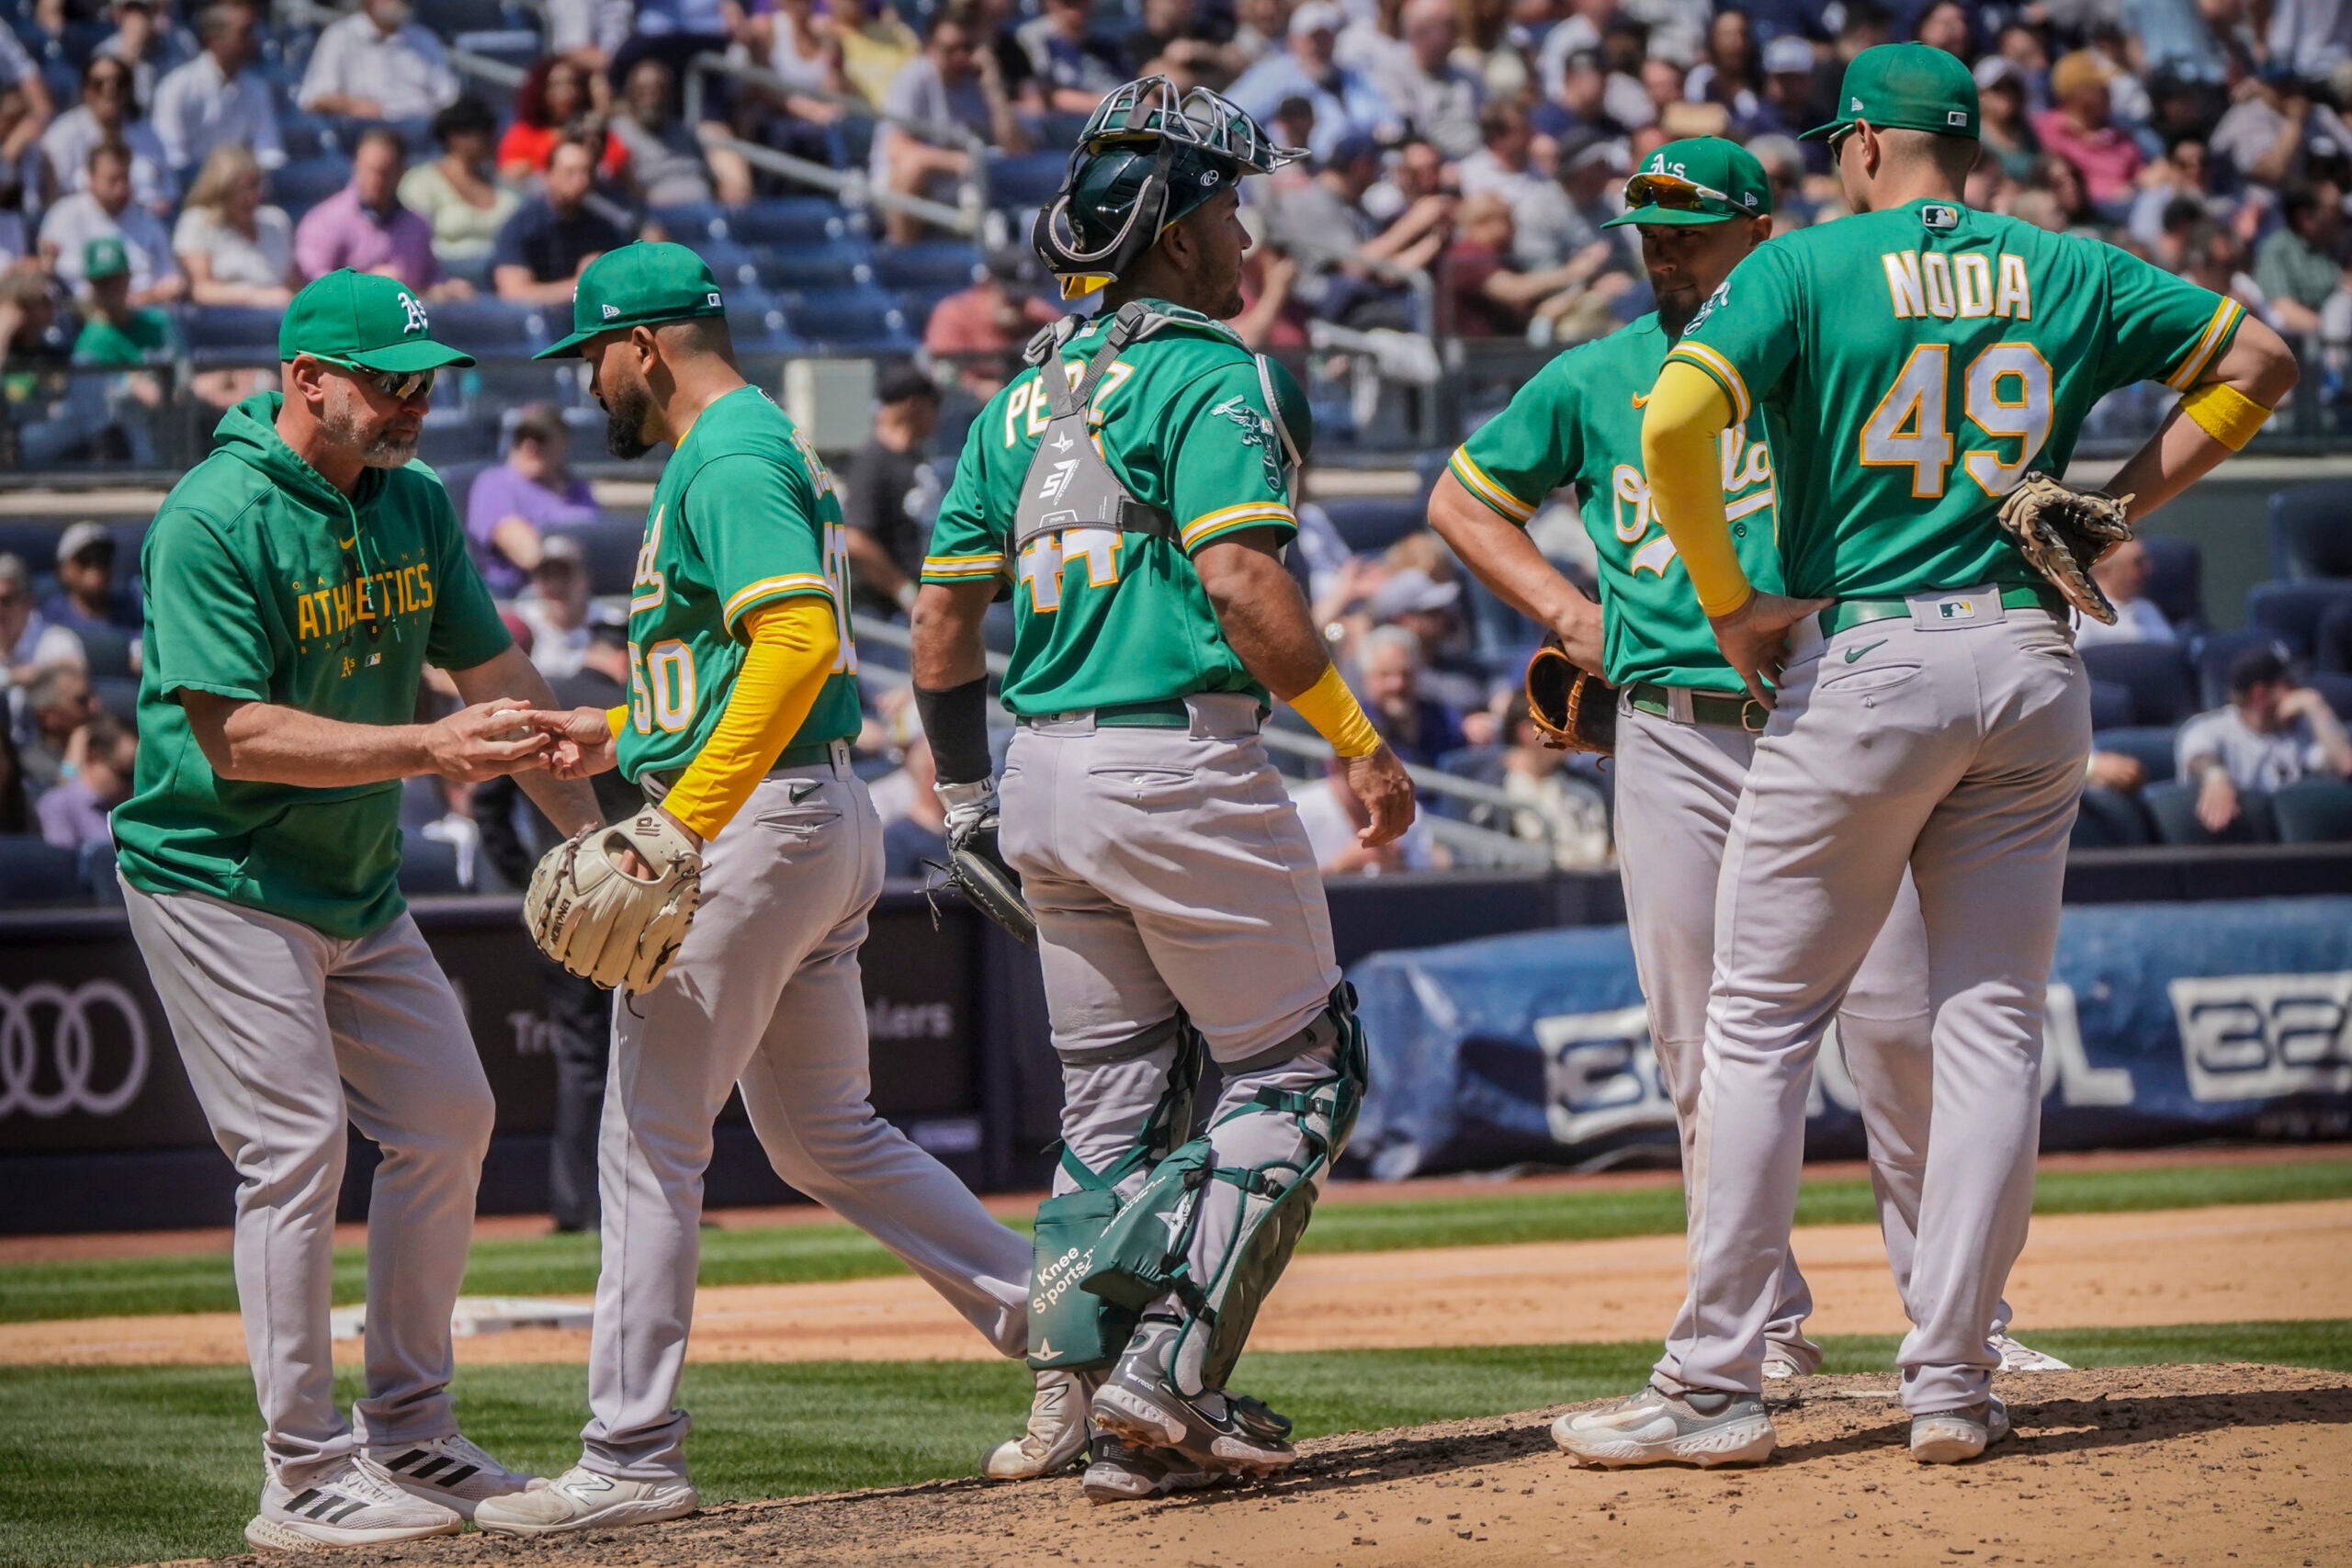 Oakland A's pitcher Rico Garcia, second from left, is pulled after giving up a grand slam home run during the fifth inning of a baseball game against the New York Yankees.